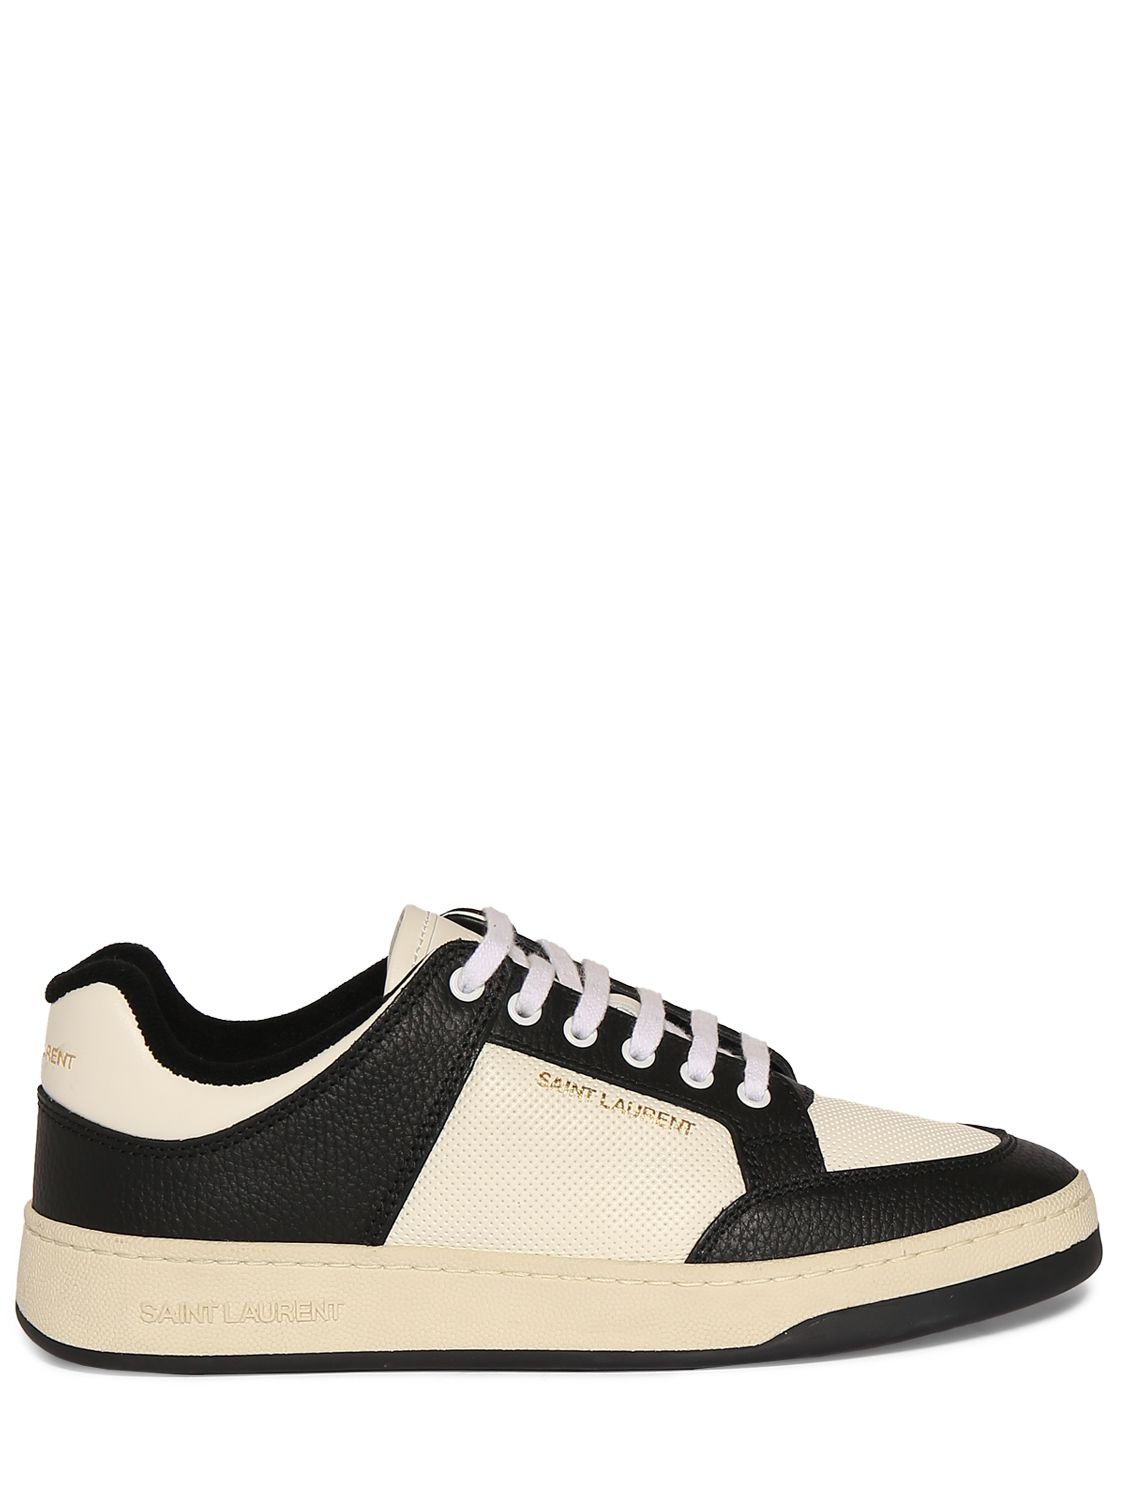 Sl/61 Leather Sneakers